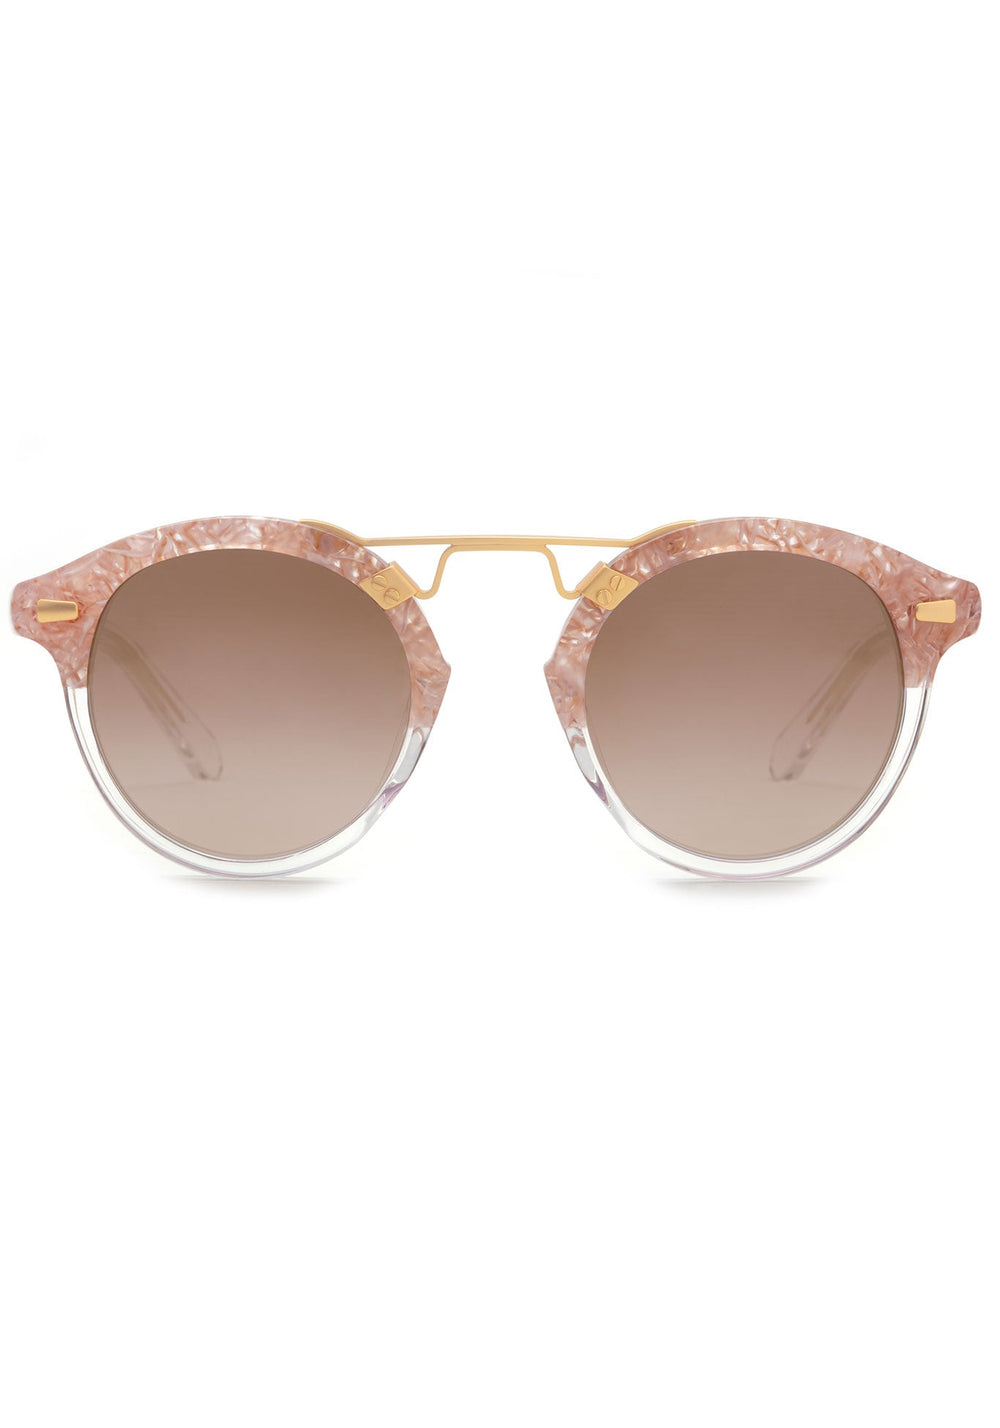 STL II | Camellia to Crystal Mirrored 24K Handcrafted, pink and clear split acetate KREWE sunglasses